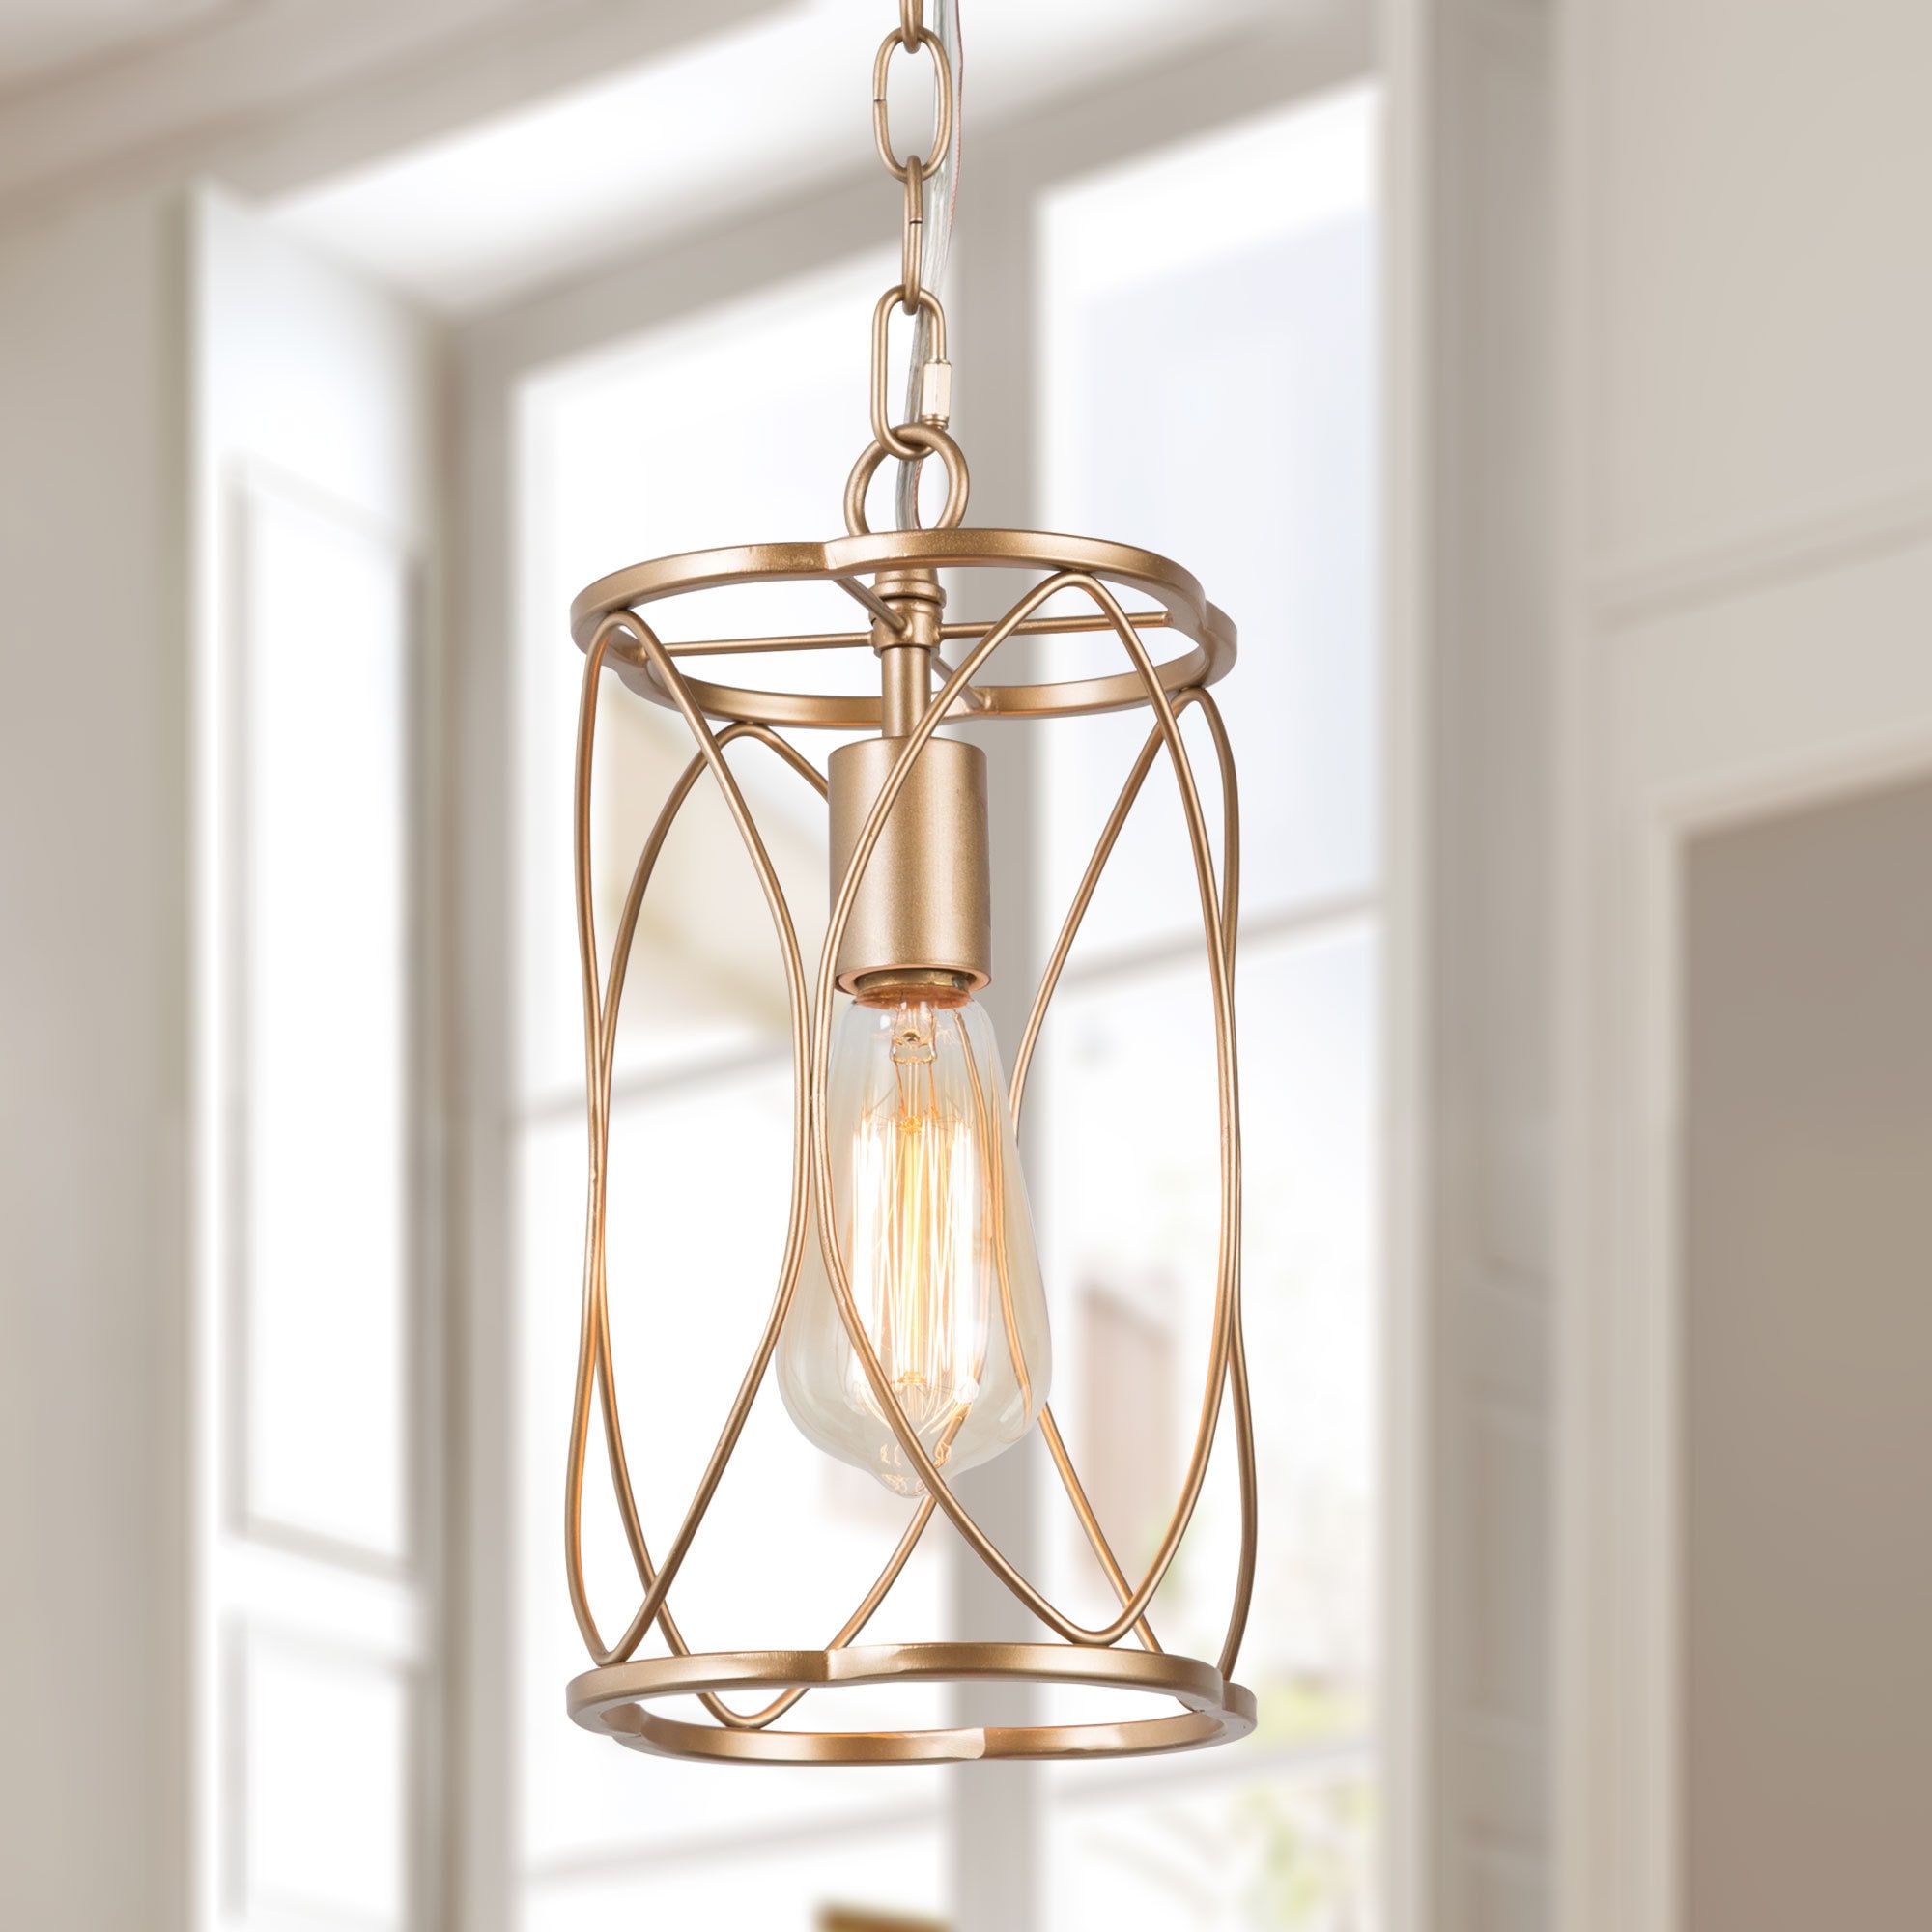 Lnc Trend Matte Champagne Gold Modern/contemporary Lantern Led Mini Pendant  Light At Lowes Inside Famous Brushed Champagne Lantern Chandeliers (View 4 of 10)